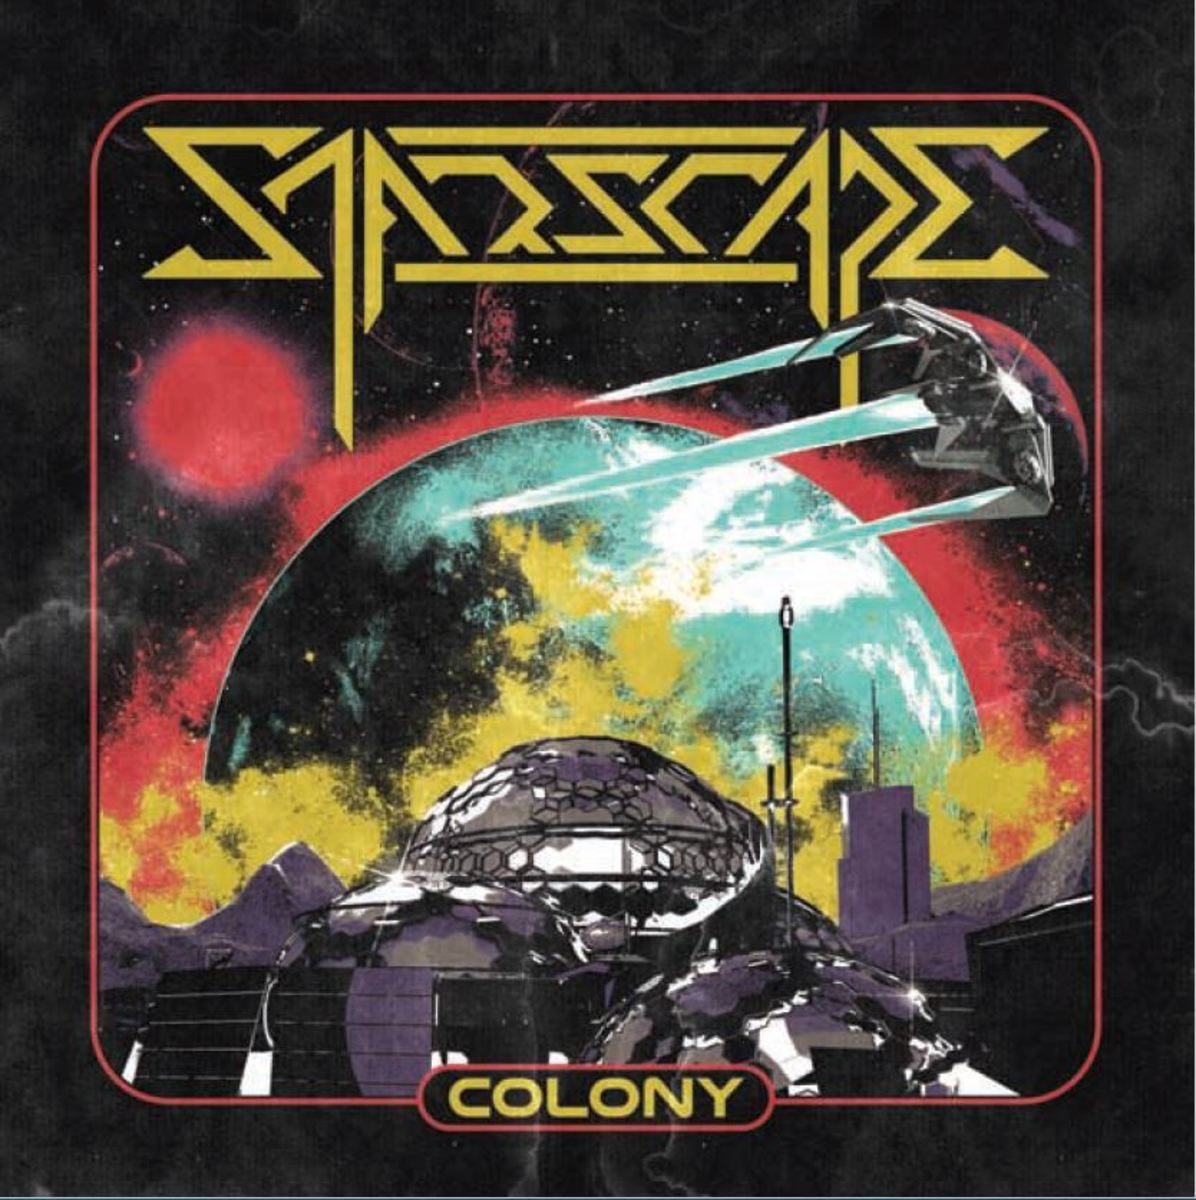 "Colony" CD cover